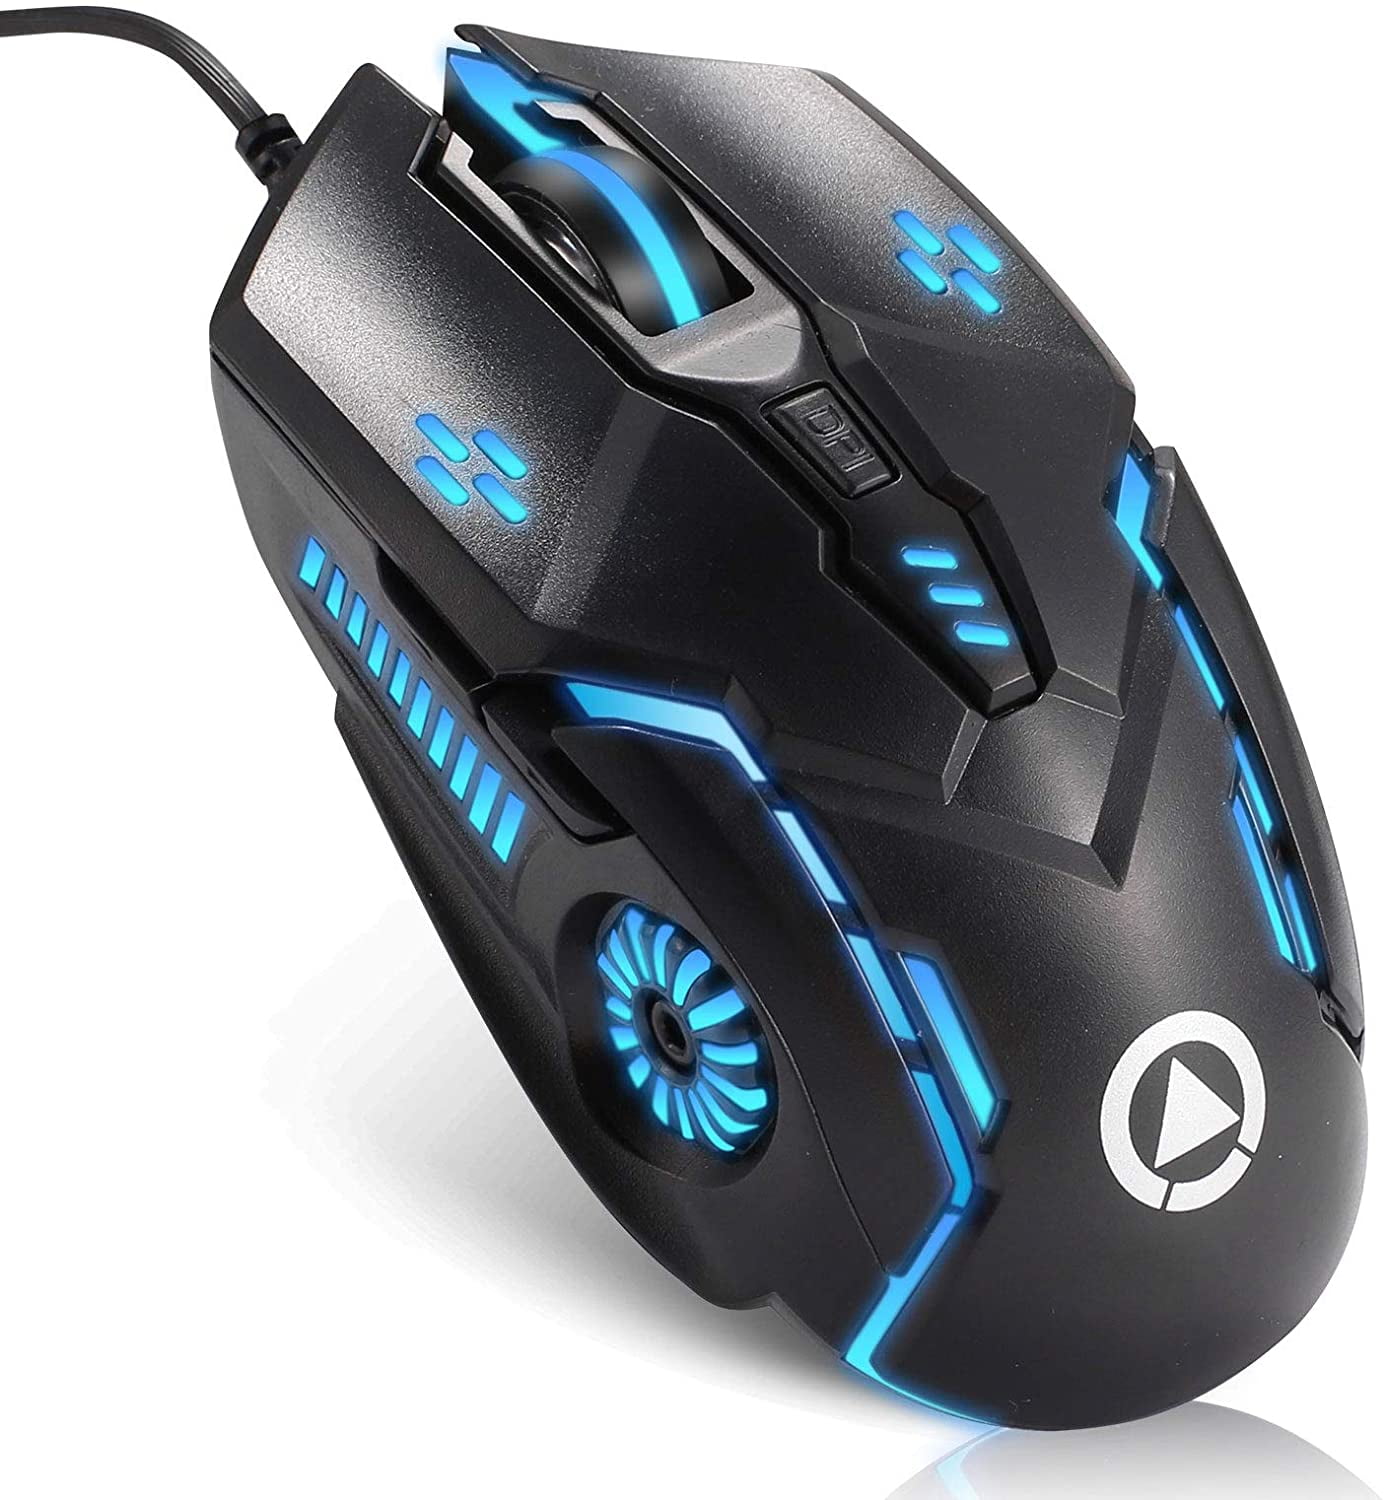 LOMOPH G5 Wired Computer Gaming Mice with 7 RGB Backlight Modes 4 Adjustable DPI MacBook Gaming Mouse Wired Windows 7/8/10/Xp Laptop USB PC Mouse for PC Plug & Play Black 6 Programmable Buttons 